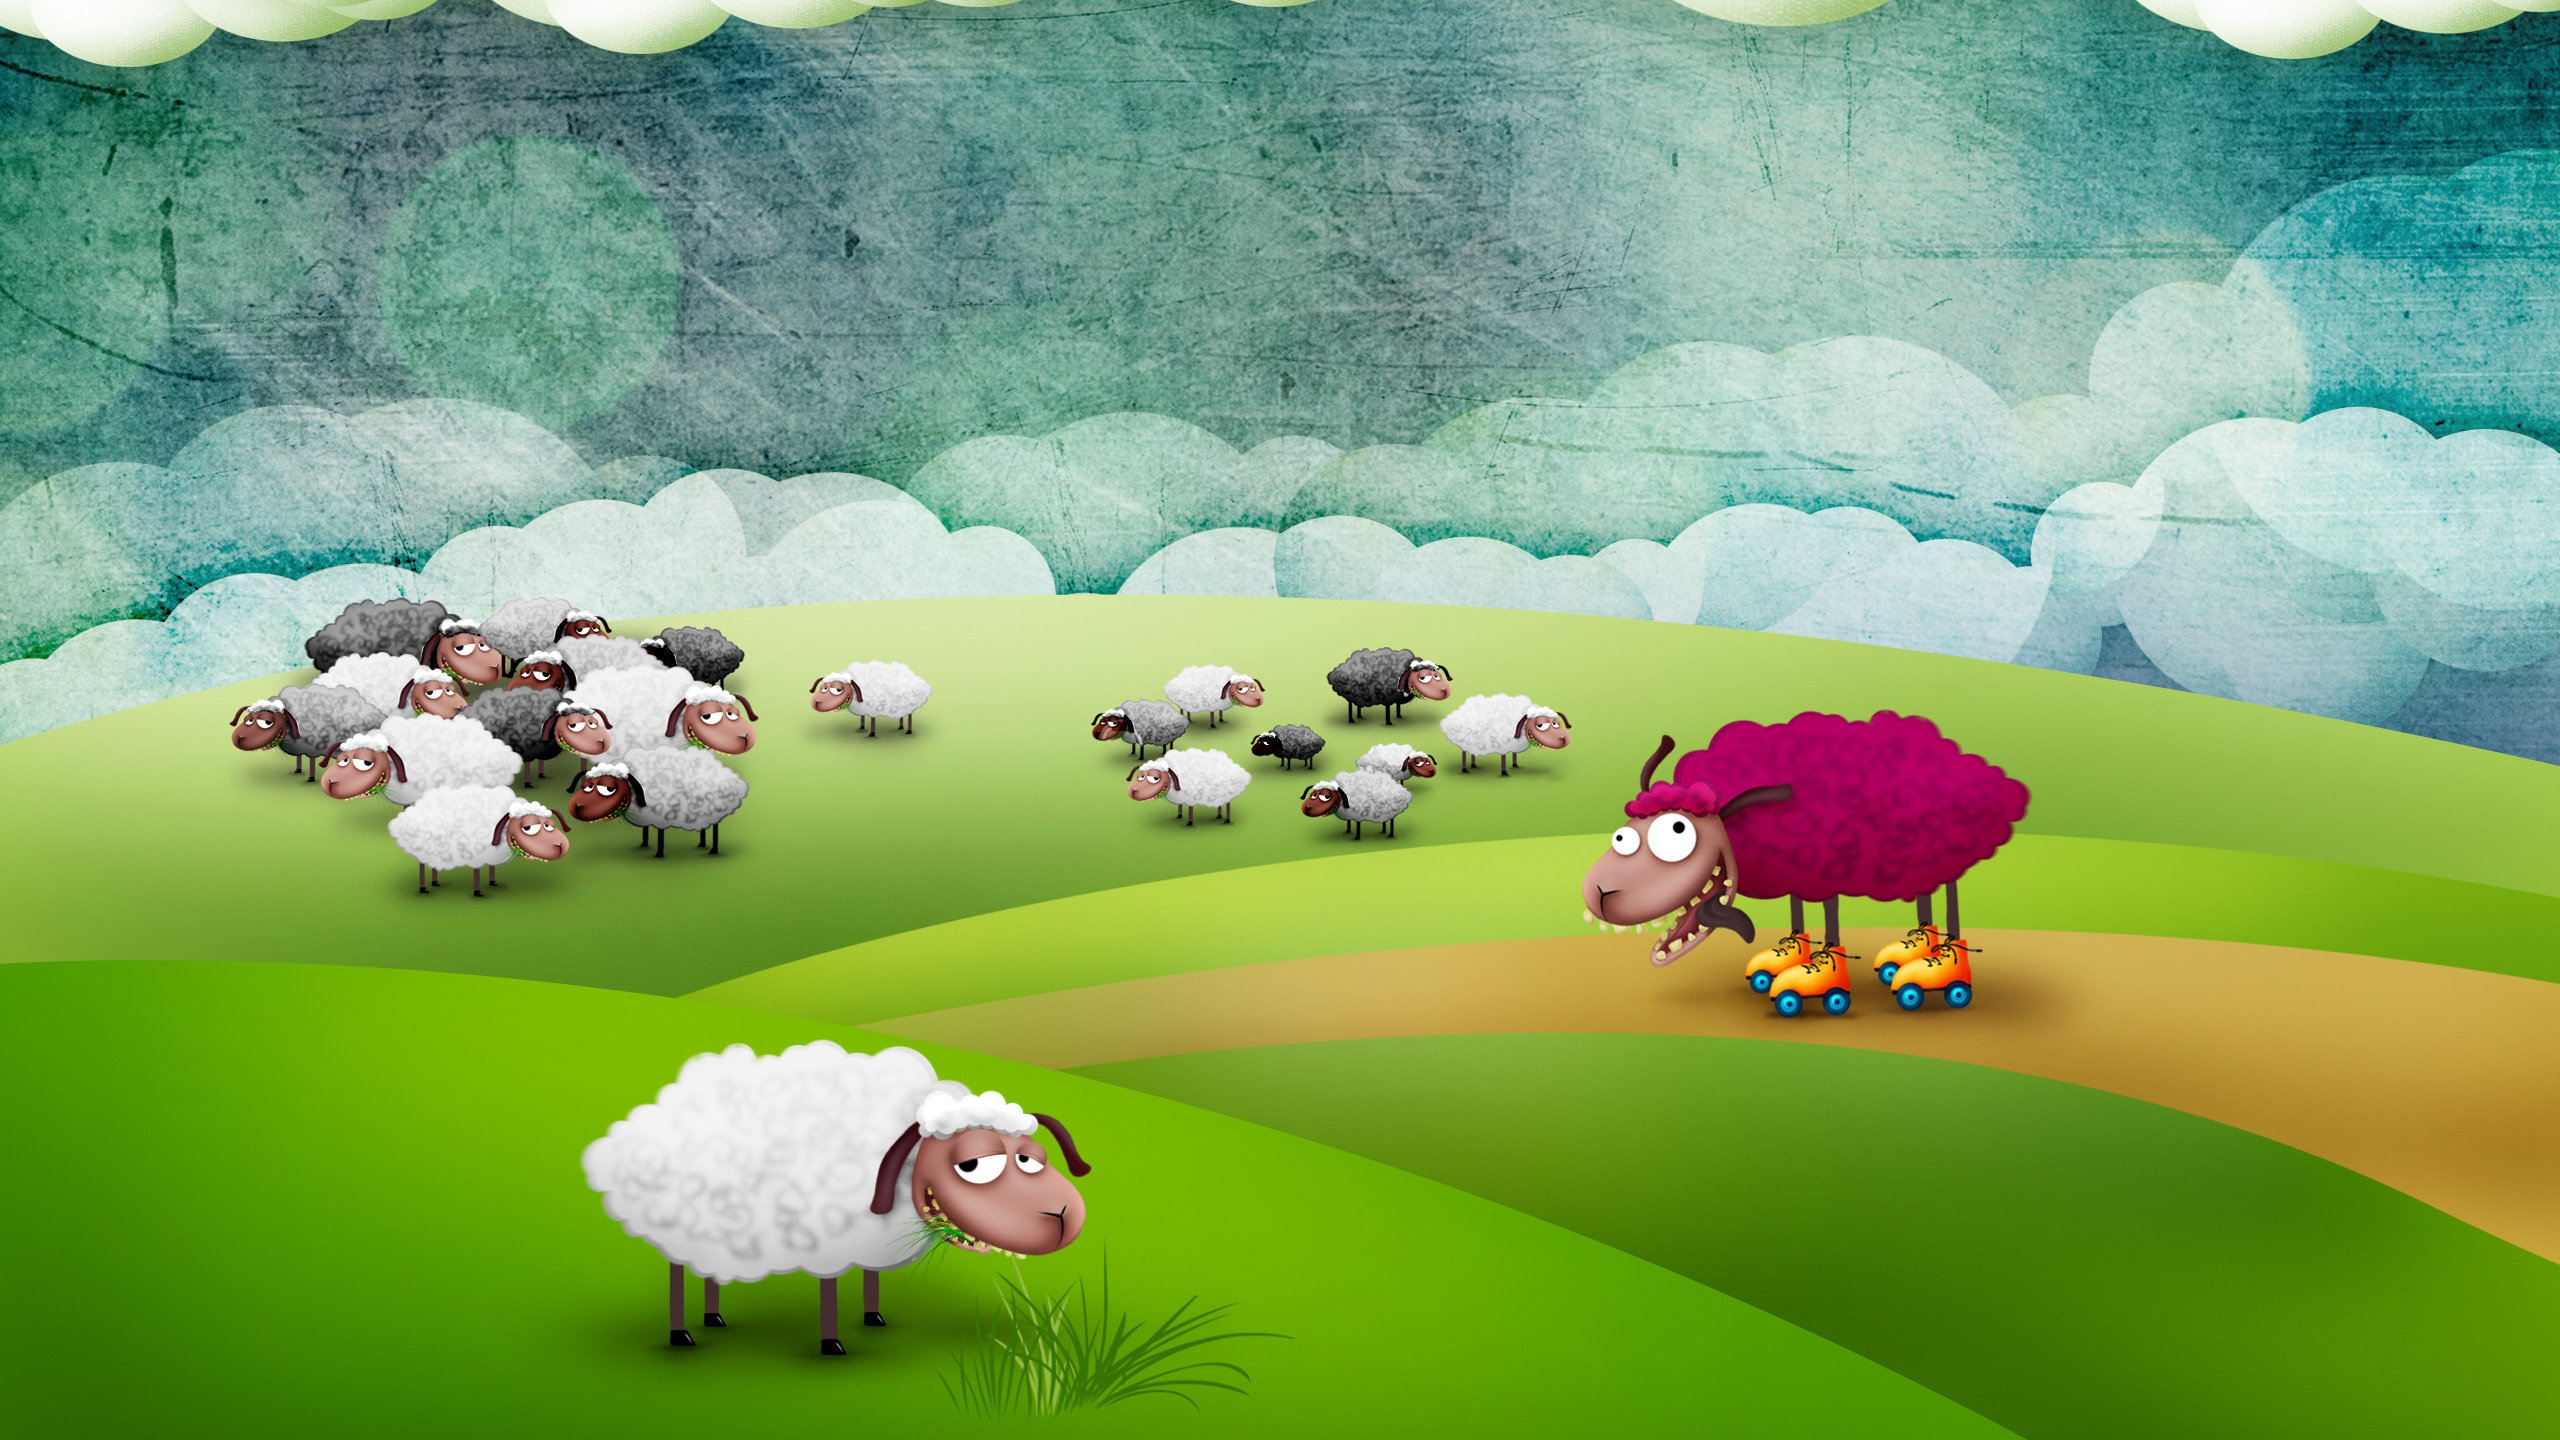 Funny Sheep for 2560x1440 HDTV resolution